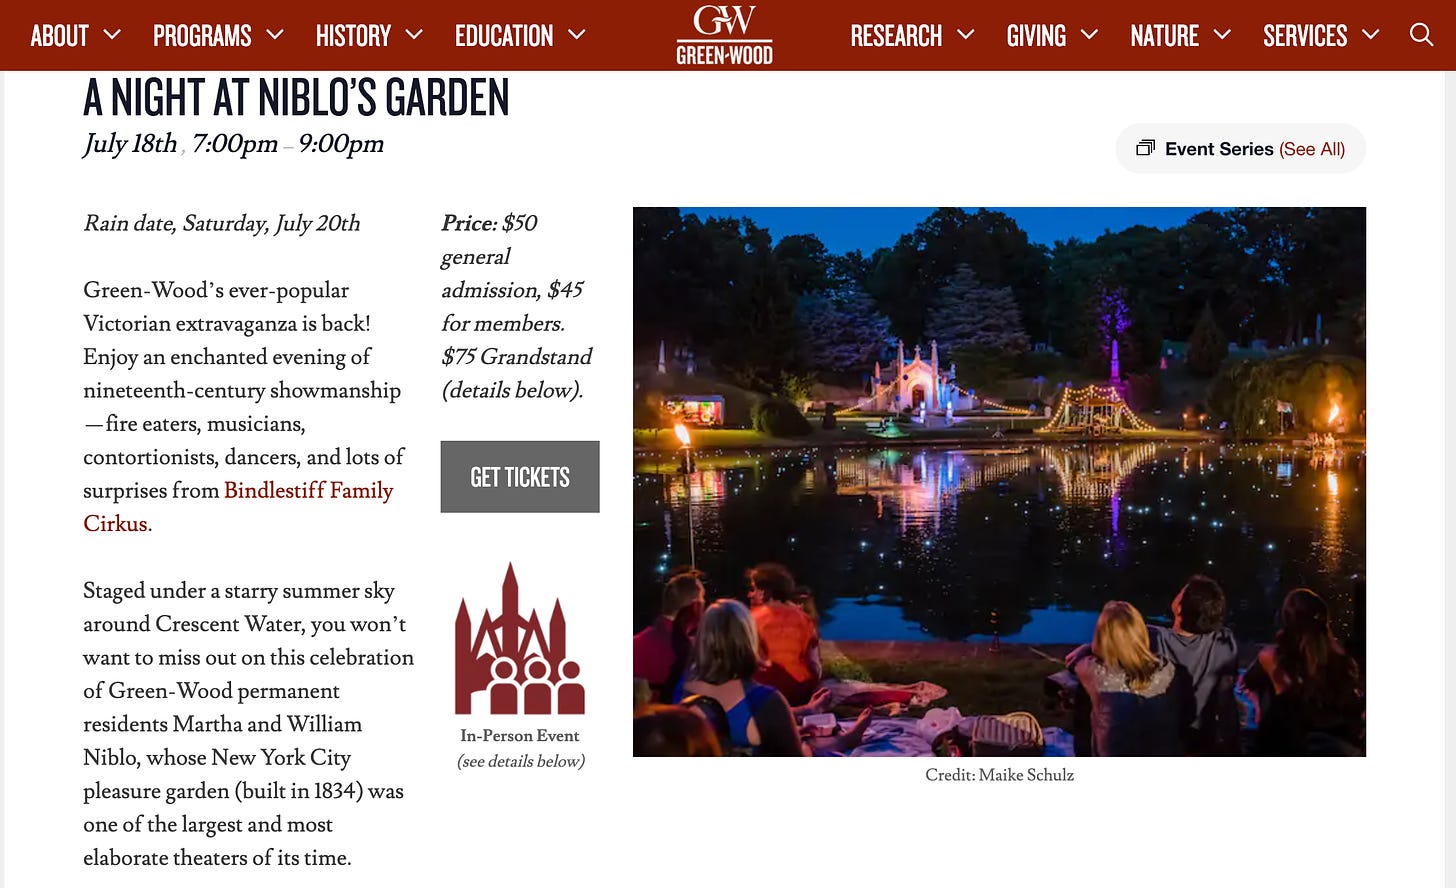 A screenshot from the Green-Wood Cemetary website advertising an event on July 18th called A Night At Niblo's Garden. It promises performers and acrobats from the Bindlestiff Family Cirkus and the Crescent Water lake.